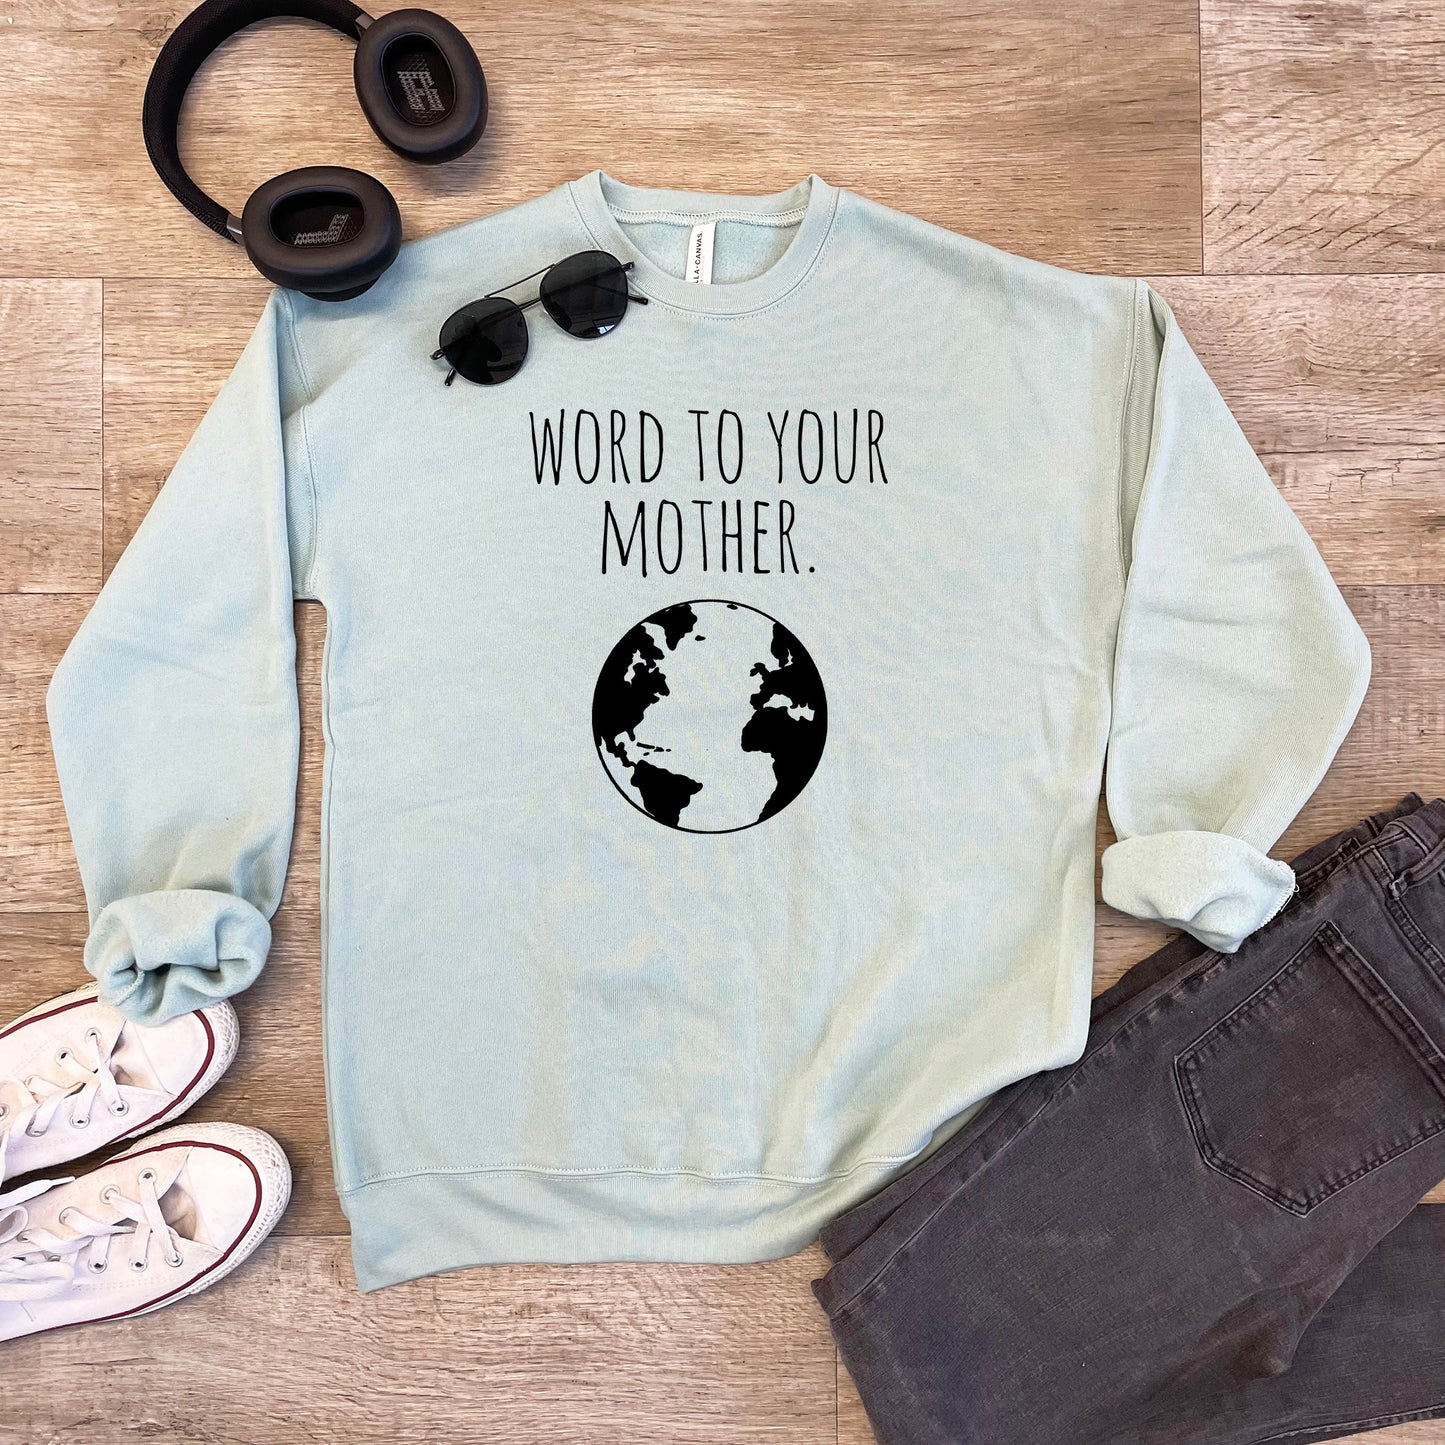 Word to Your Mother (Earth) - Unisex Sweatshirt - Heather Gray or Dusty Blue